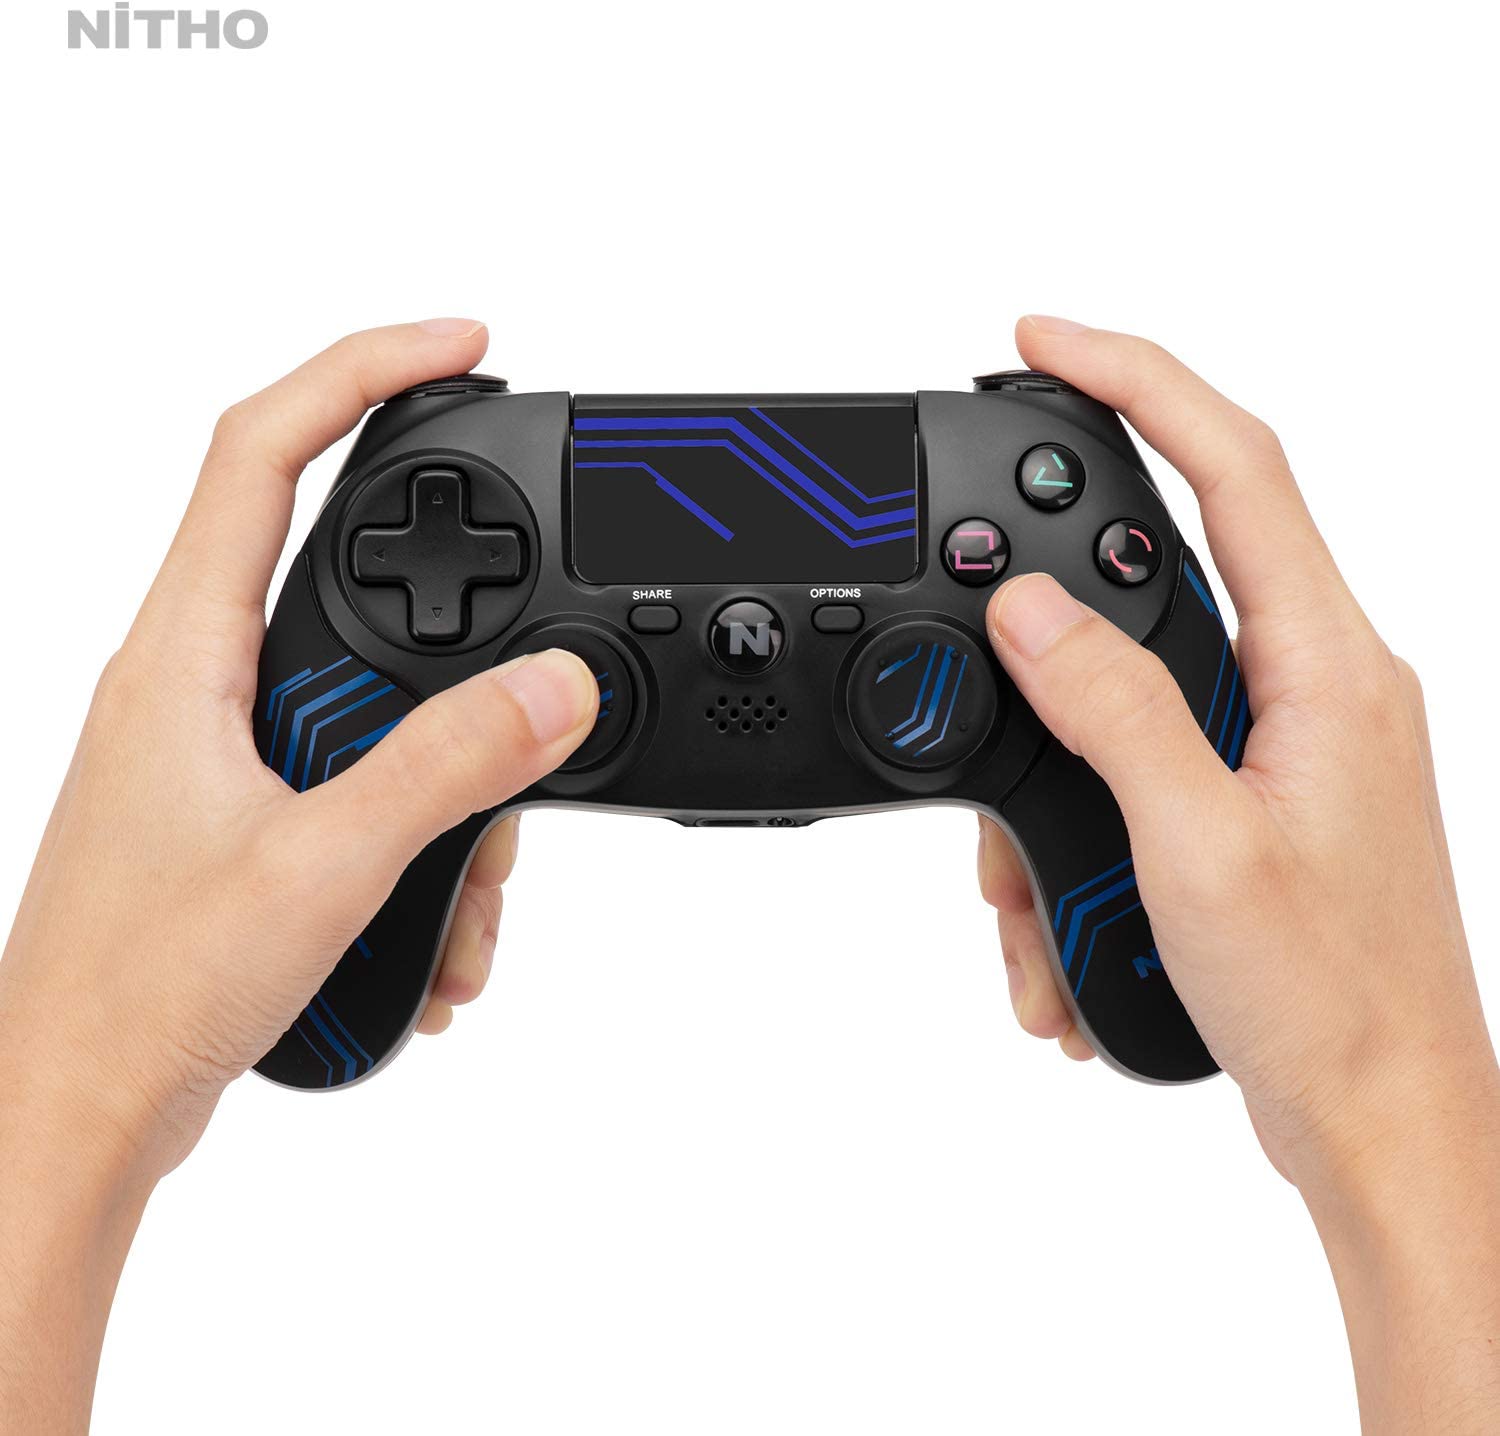 PS4 | PS3 | PC Nitho Wireless Controller Adonis - Black/Blue